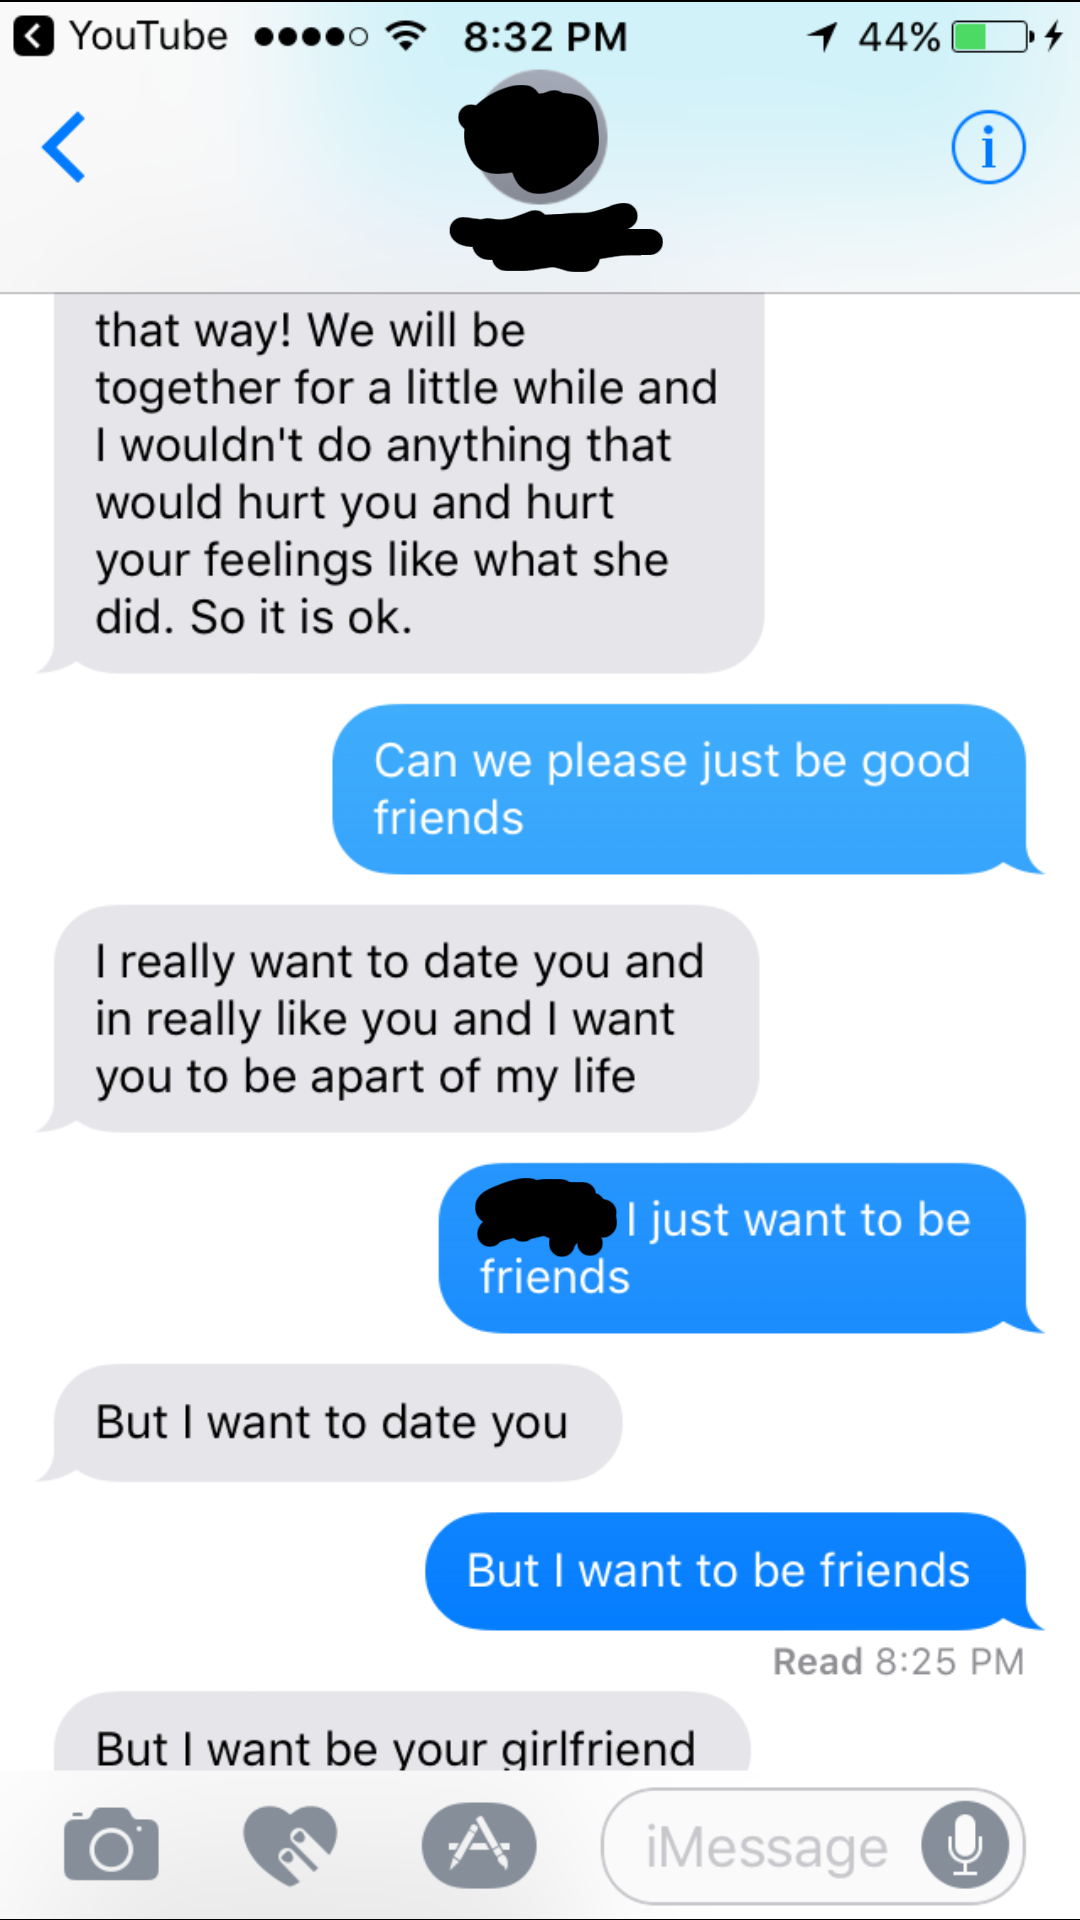 nicegirls posts - YouTube 1 44% D that way! We will be together for a little while and I wouldn't do anything that would hurt you and hurt your feelings what she did. So it is ok. Can we please just be good friends I really want to date you and in really 